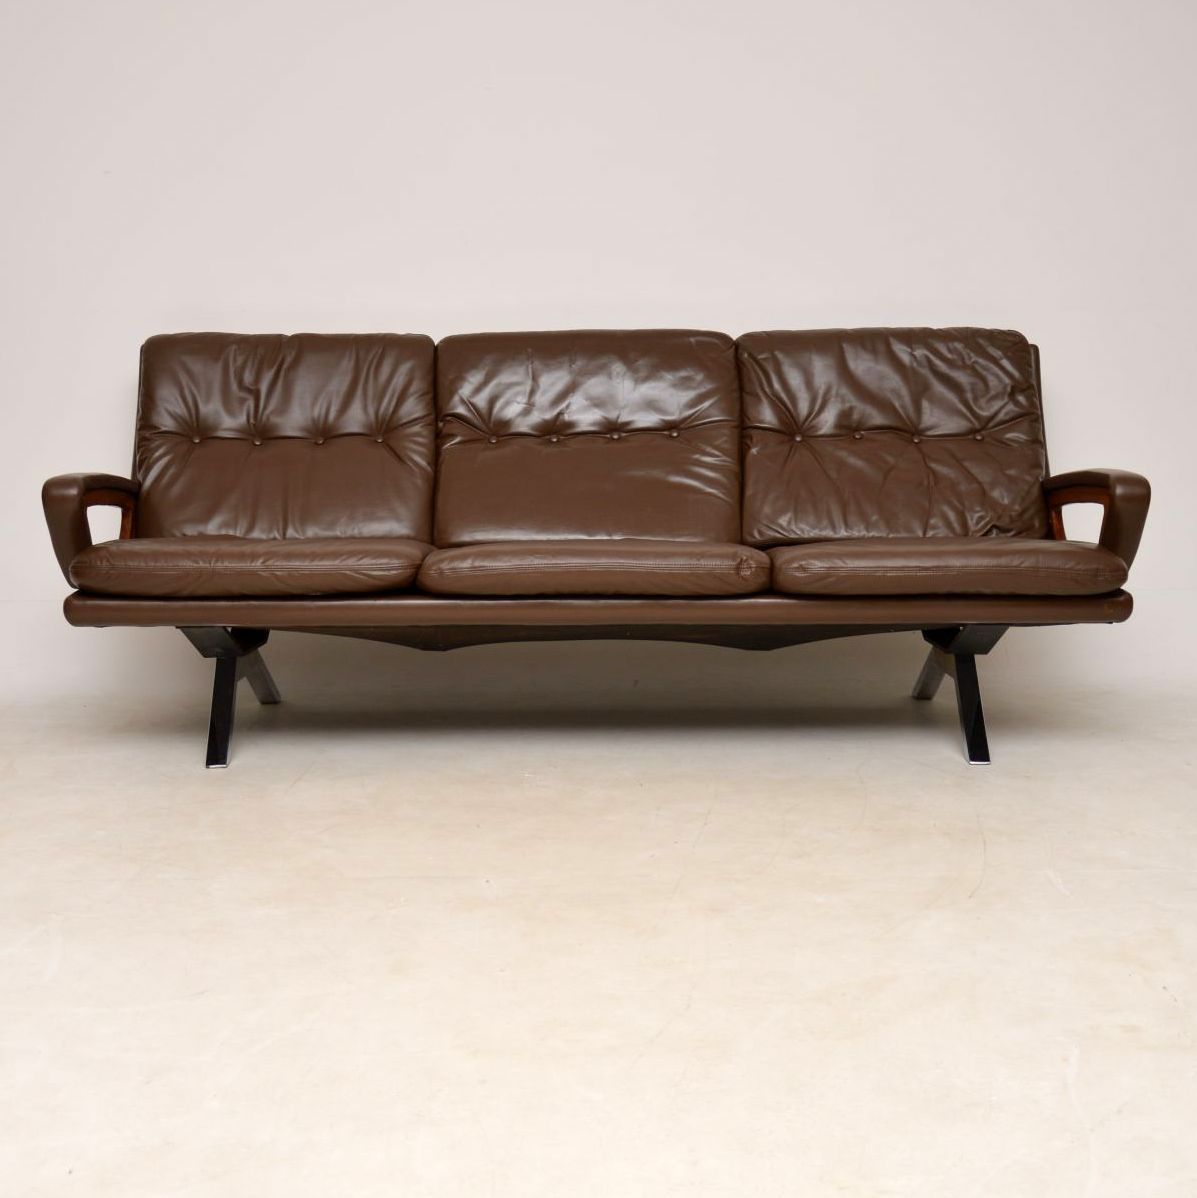 1960'S Danish Vintage Leather Teak And Chrome Sofa Throughout Retro Sofas And Chairs (View 7 of 15)